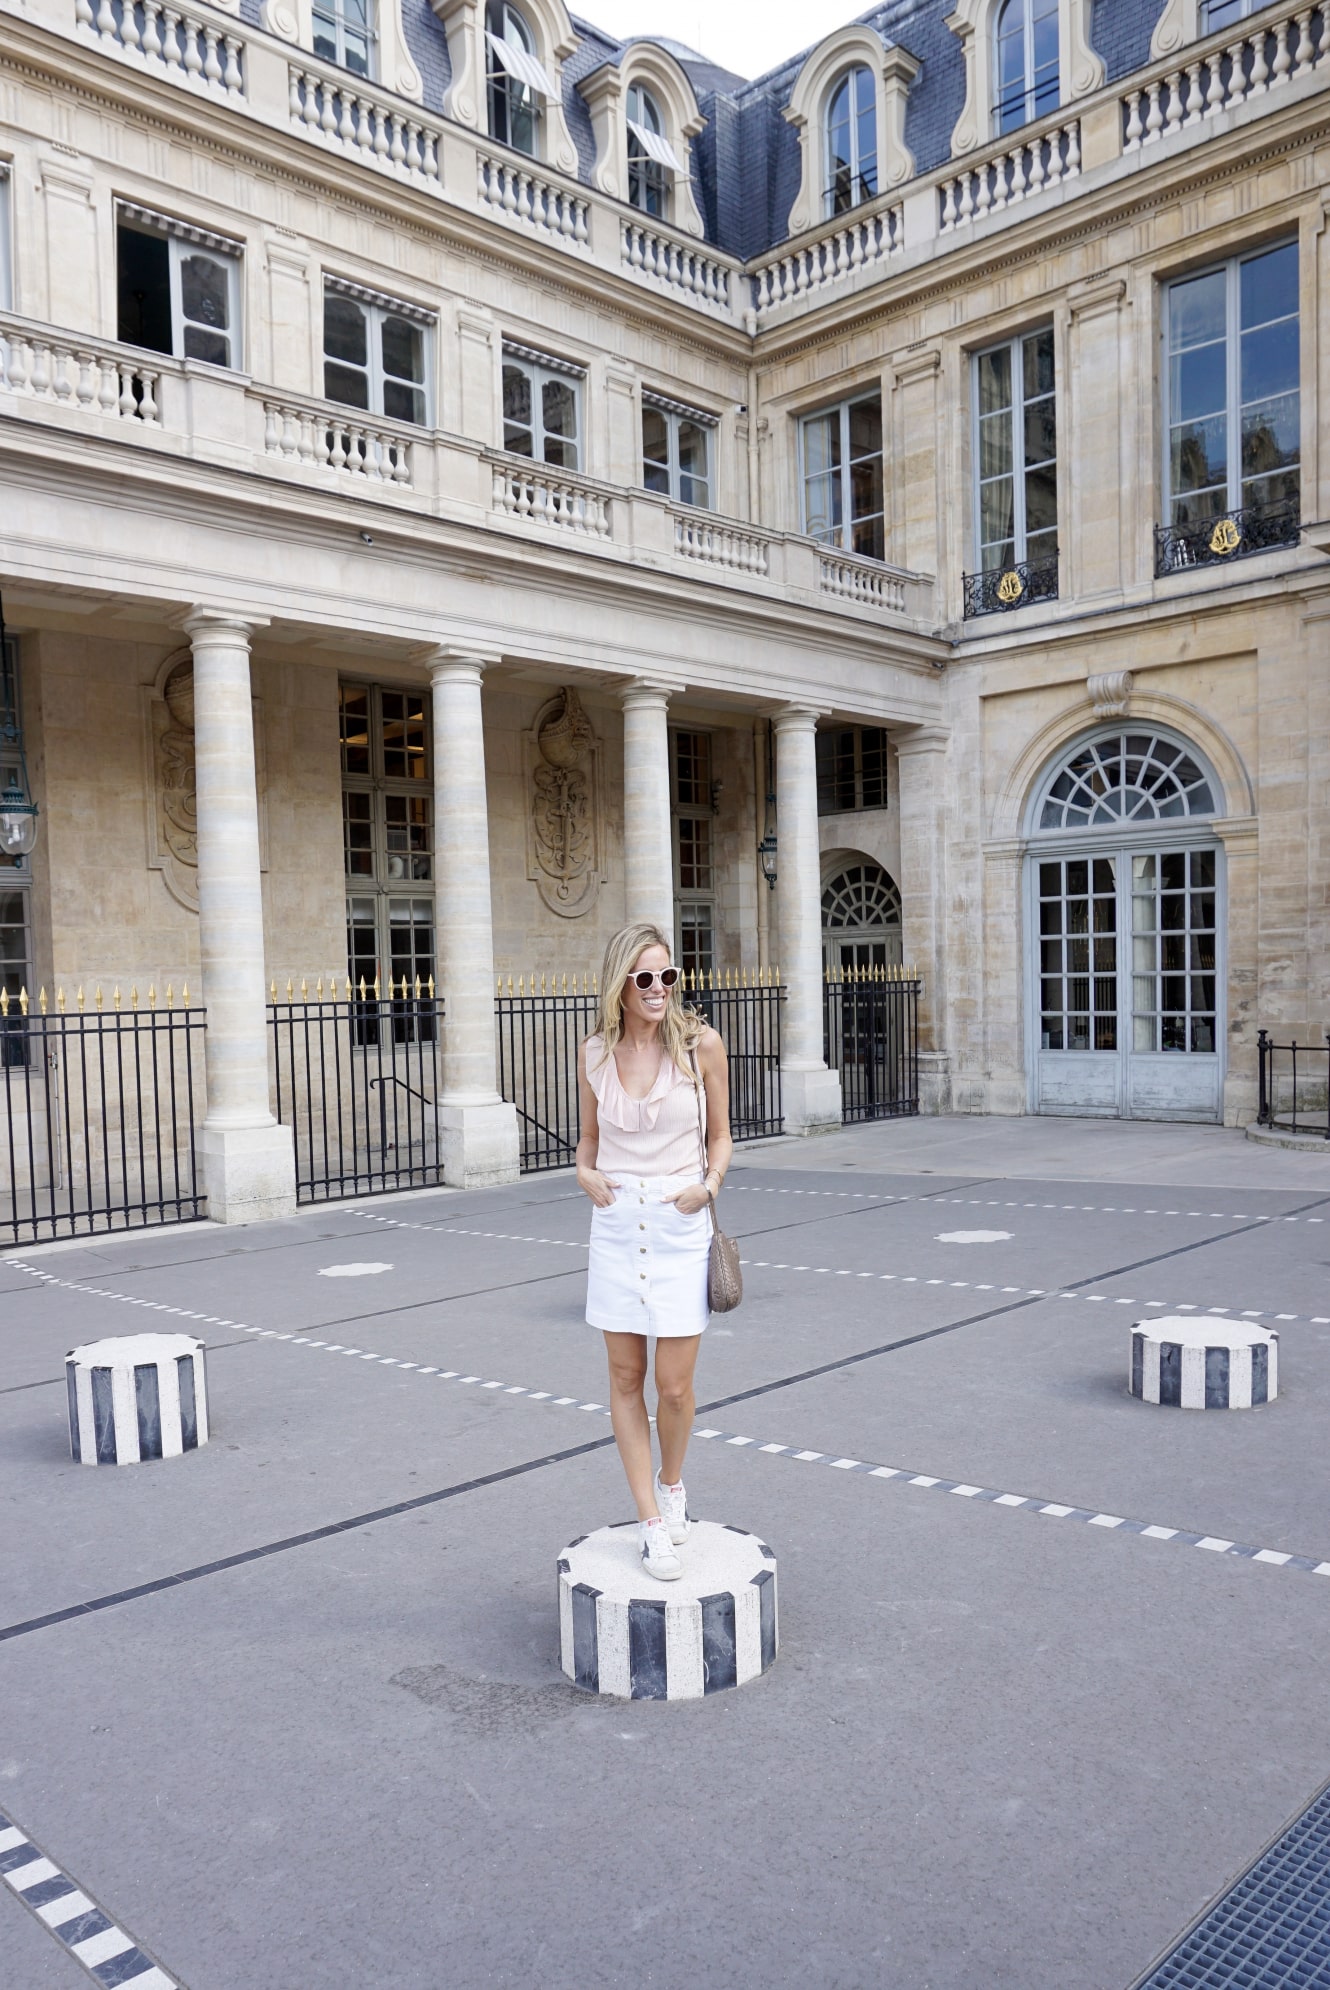 Domaine National du Palais-Royal - All You Need to Know BEFORE You